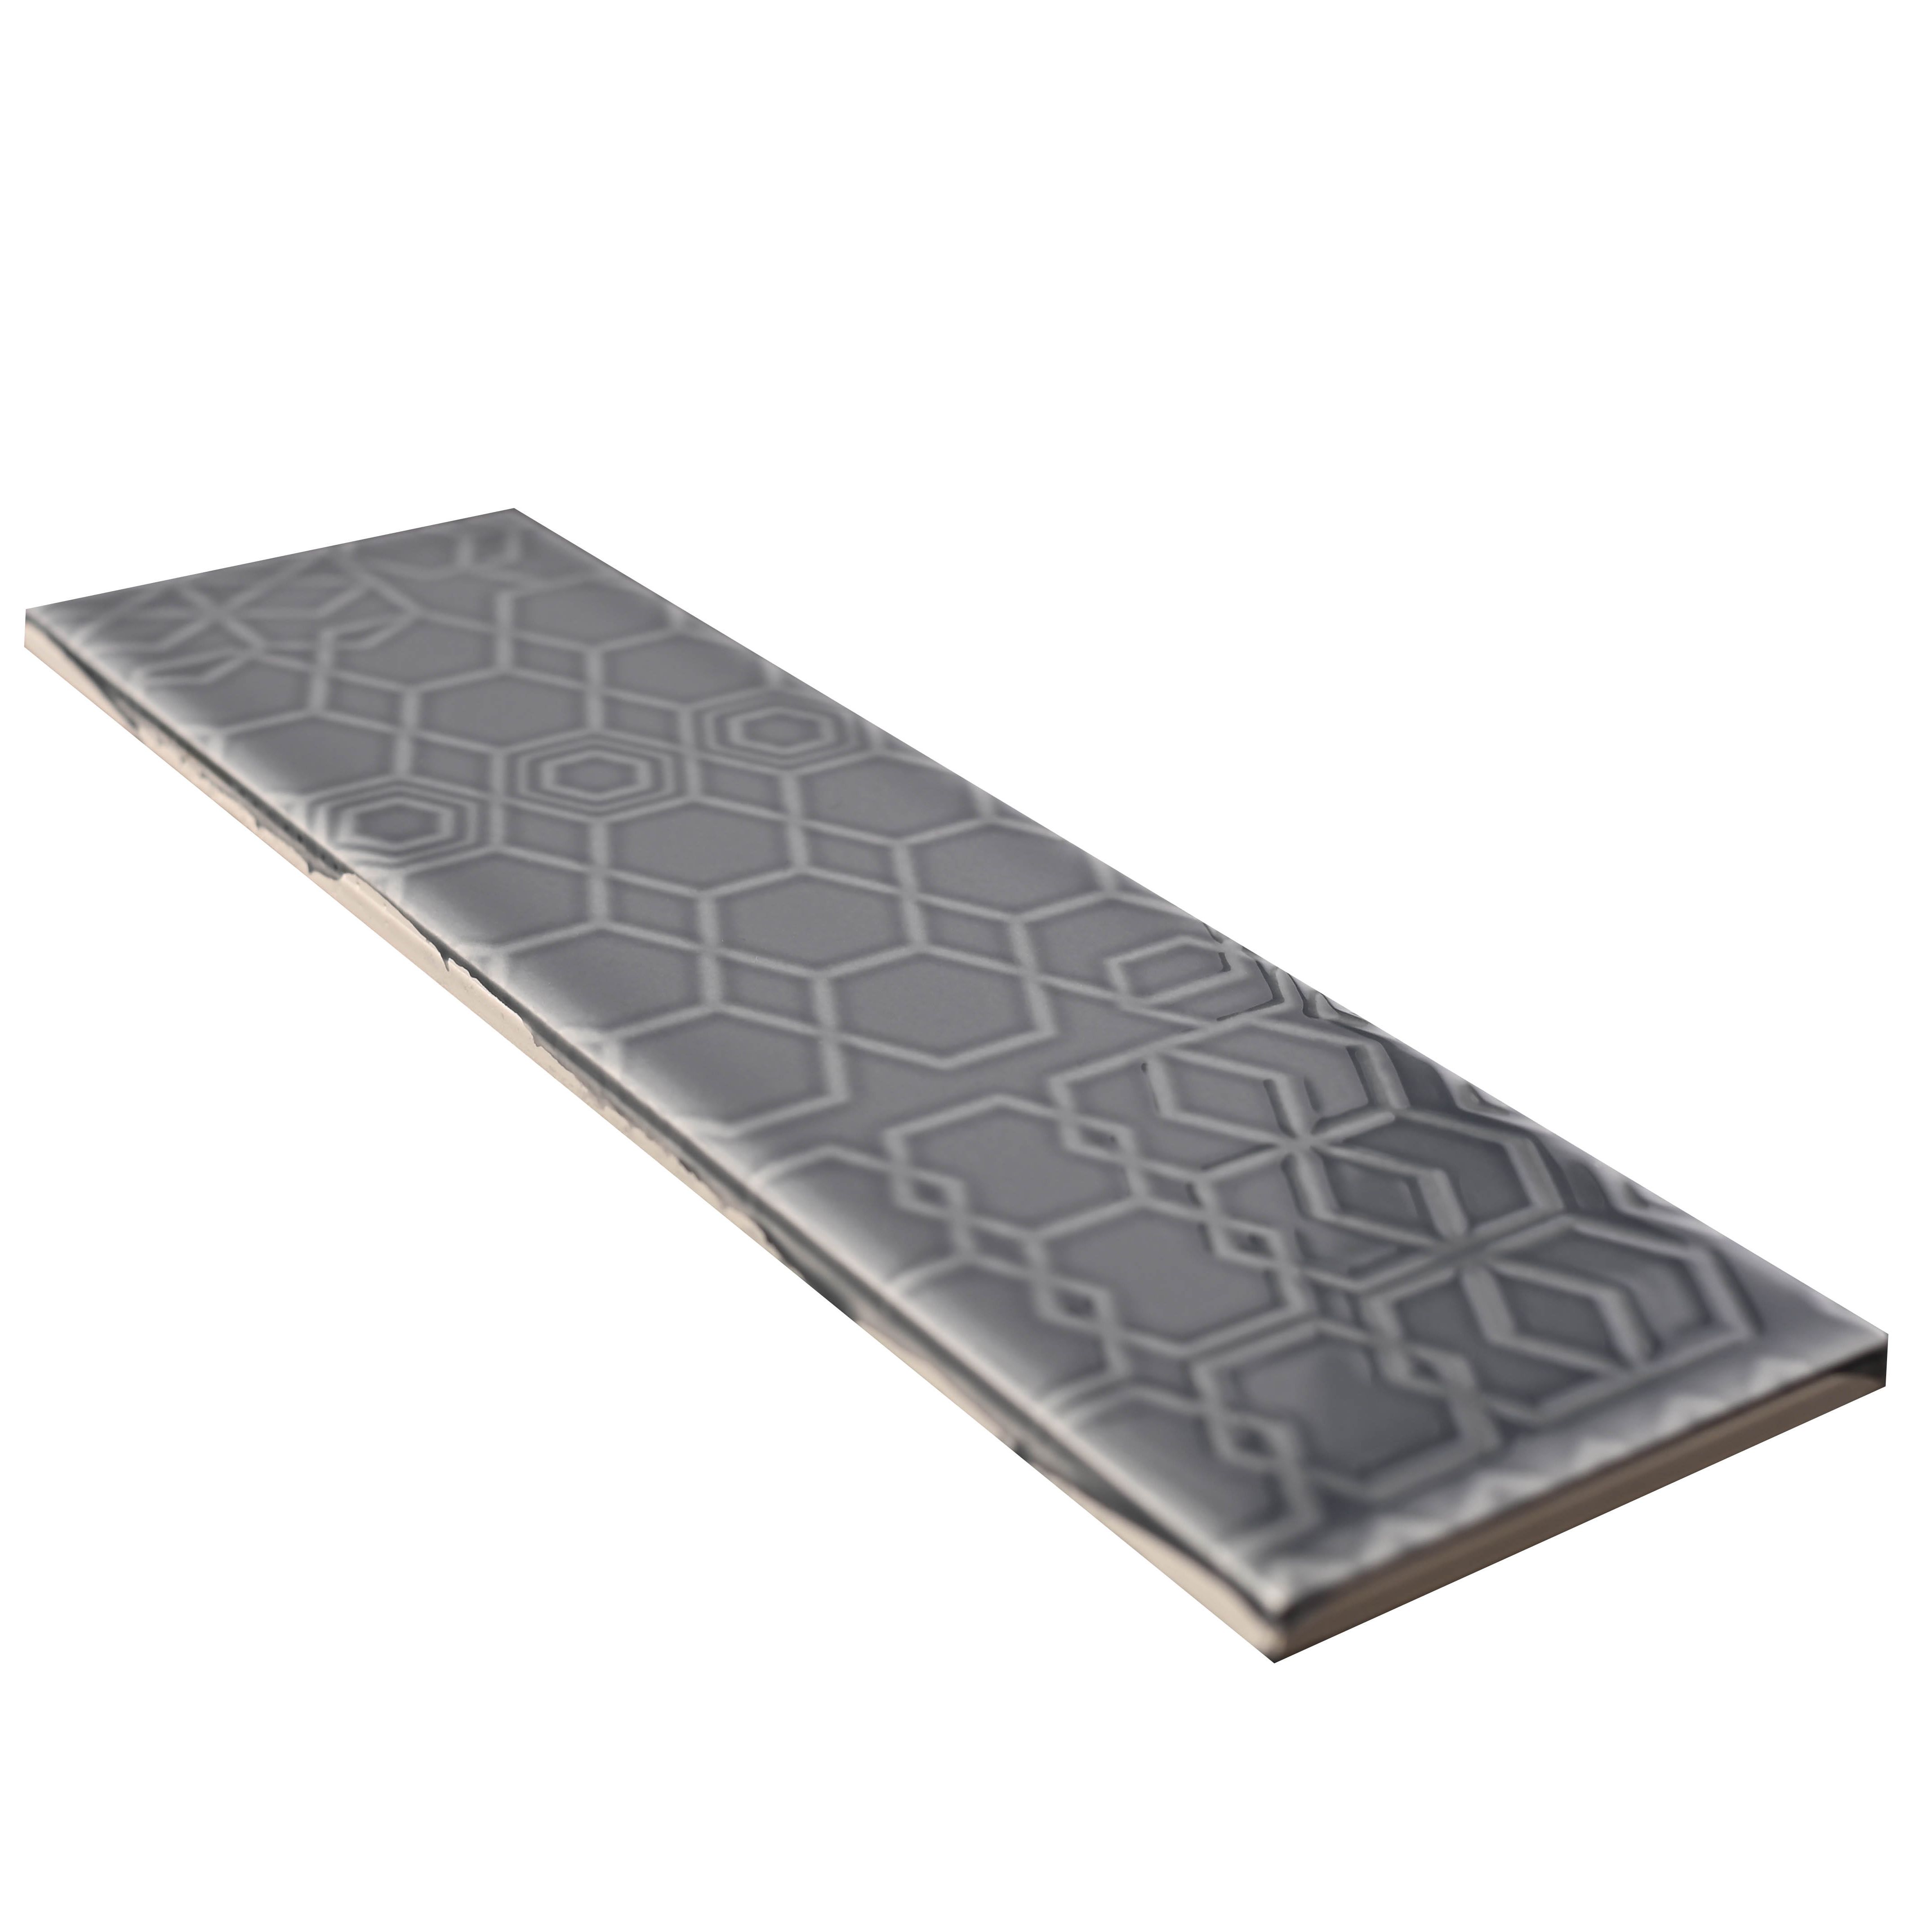 Johnson Tiles Mayfair Grey Gloss Patterned Textured Ceramic Indoor Wall Tile, Pack of 54, (L)245mm (W)75mm